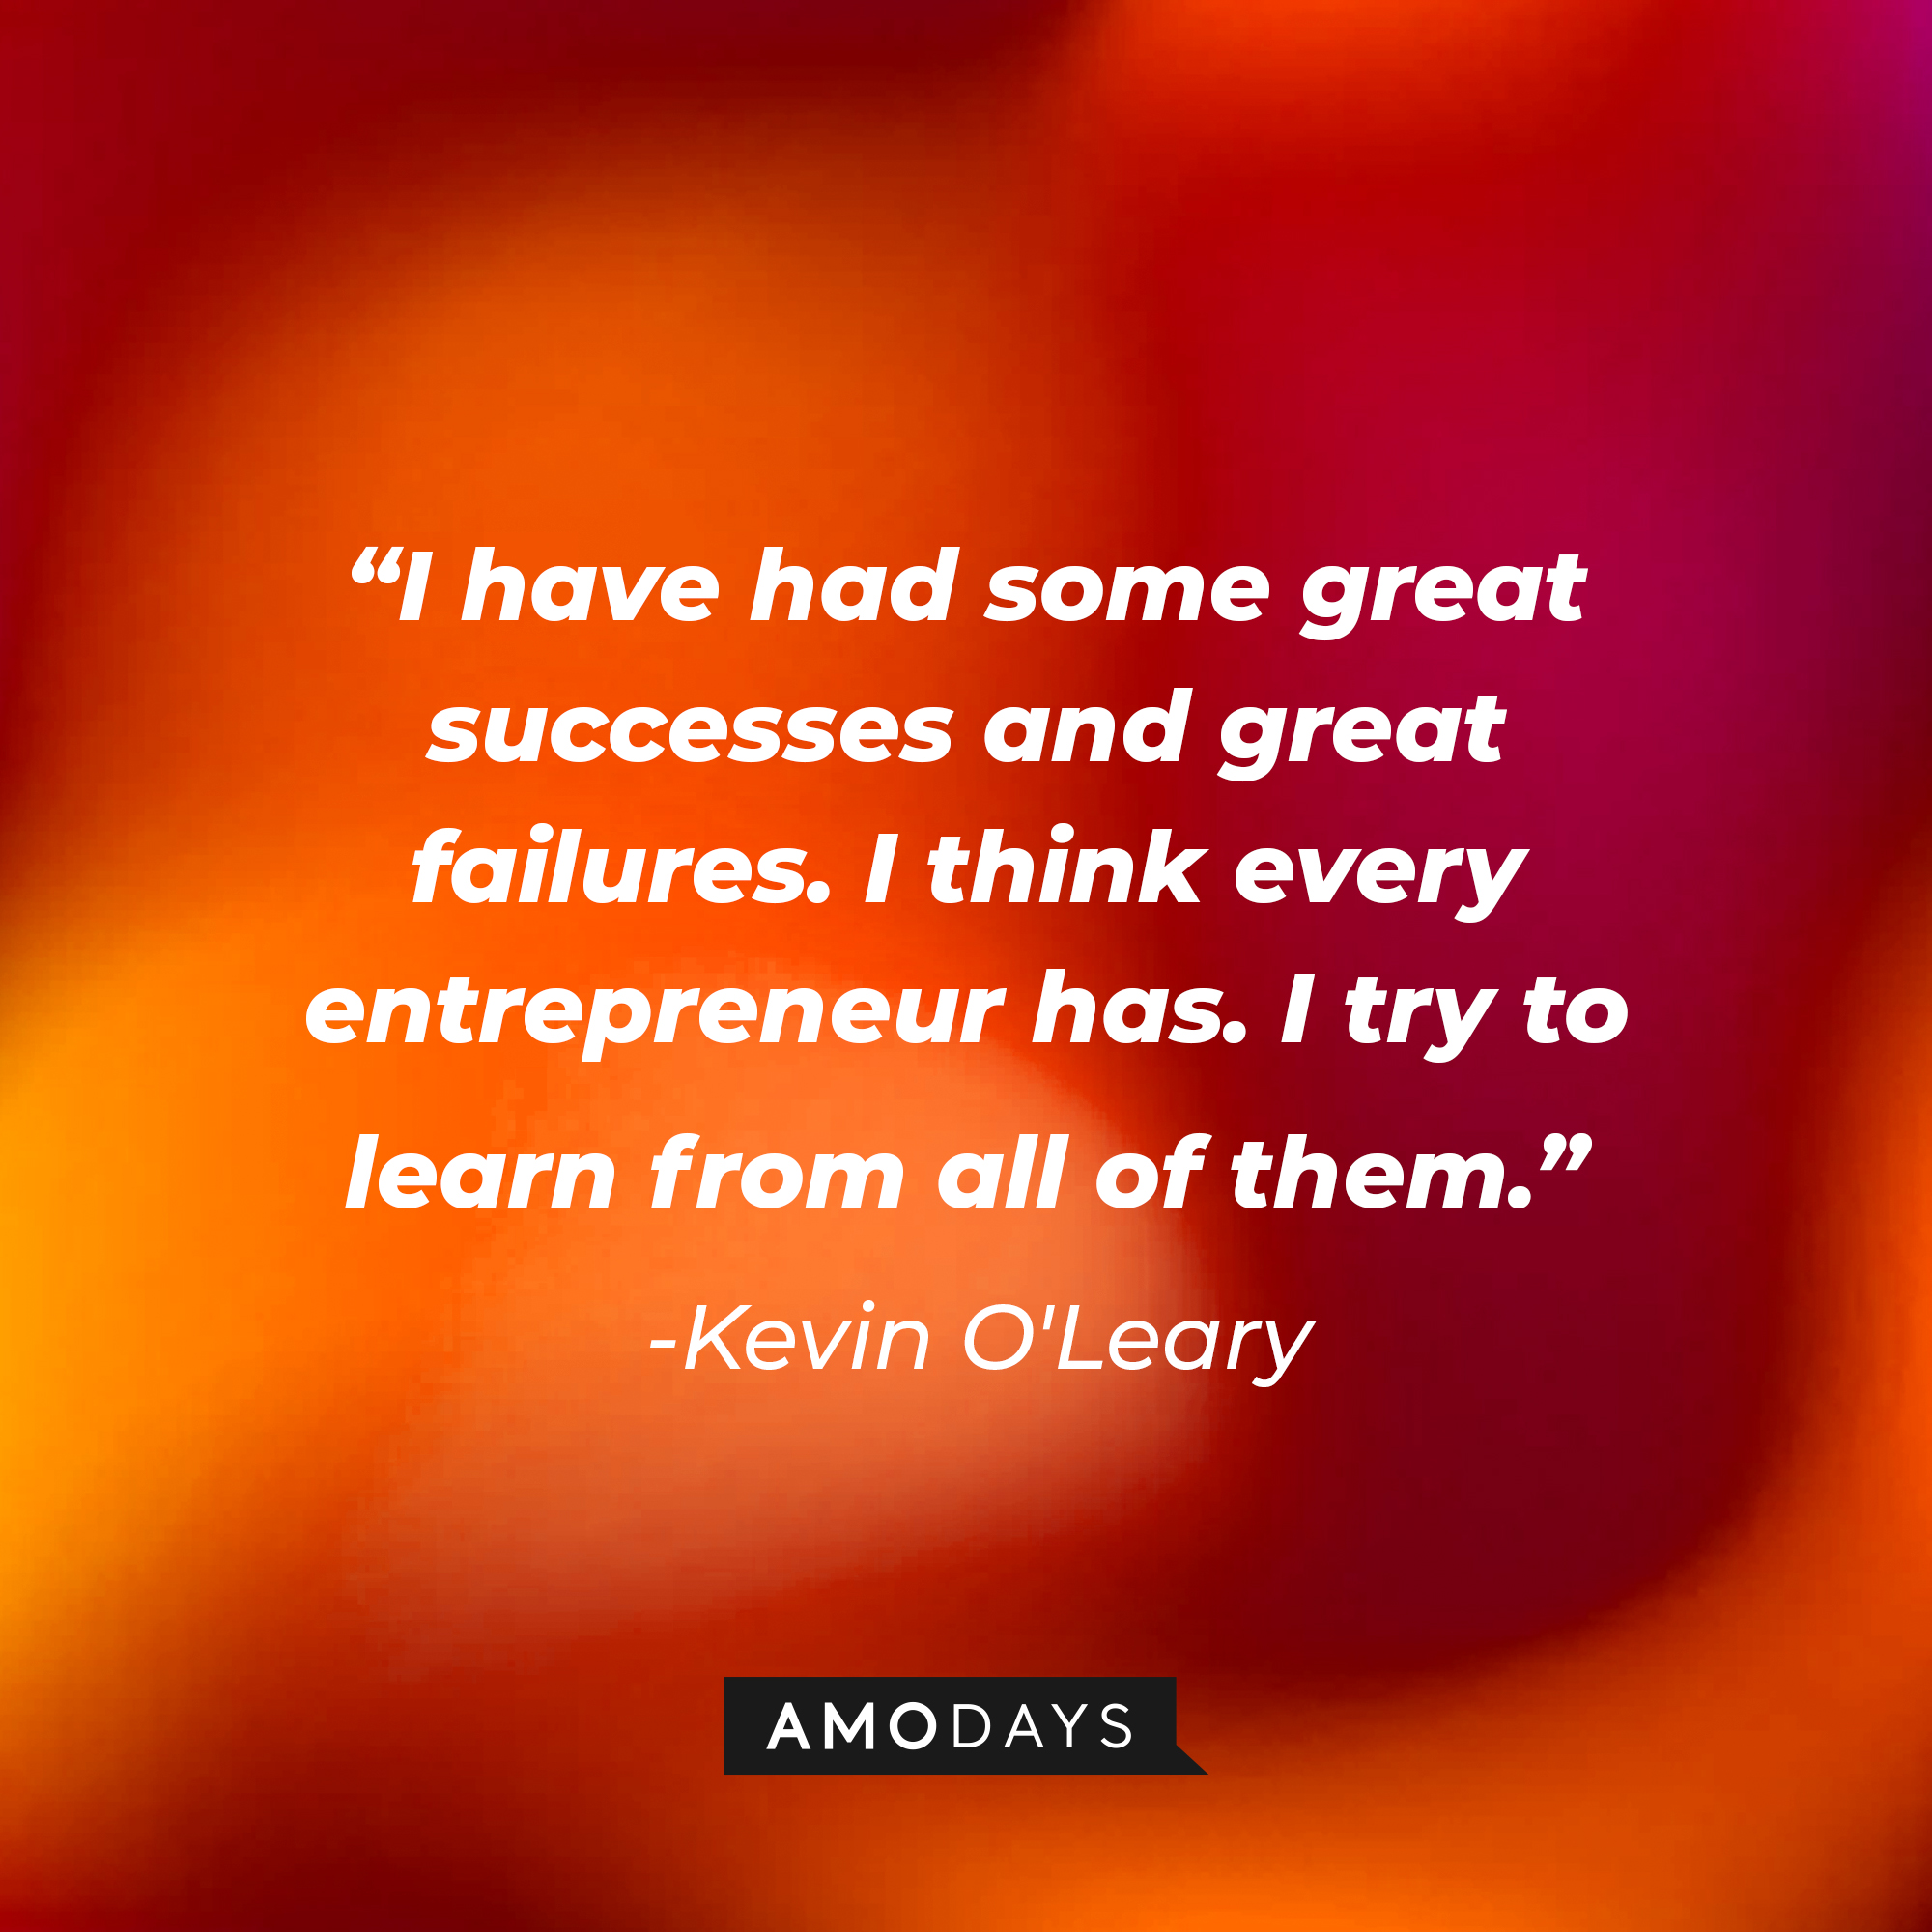 A photo with Kevin O'Leary's Quote, "I have had some great successes and great failures. I think every entrepreneur has. I try to learn from all of them." | Source: Amodays